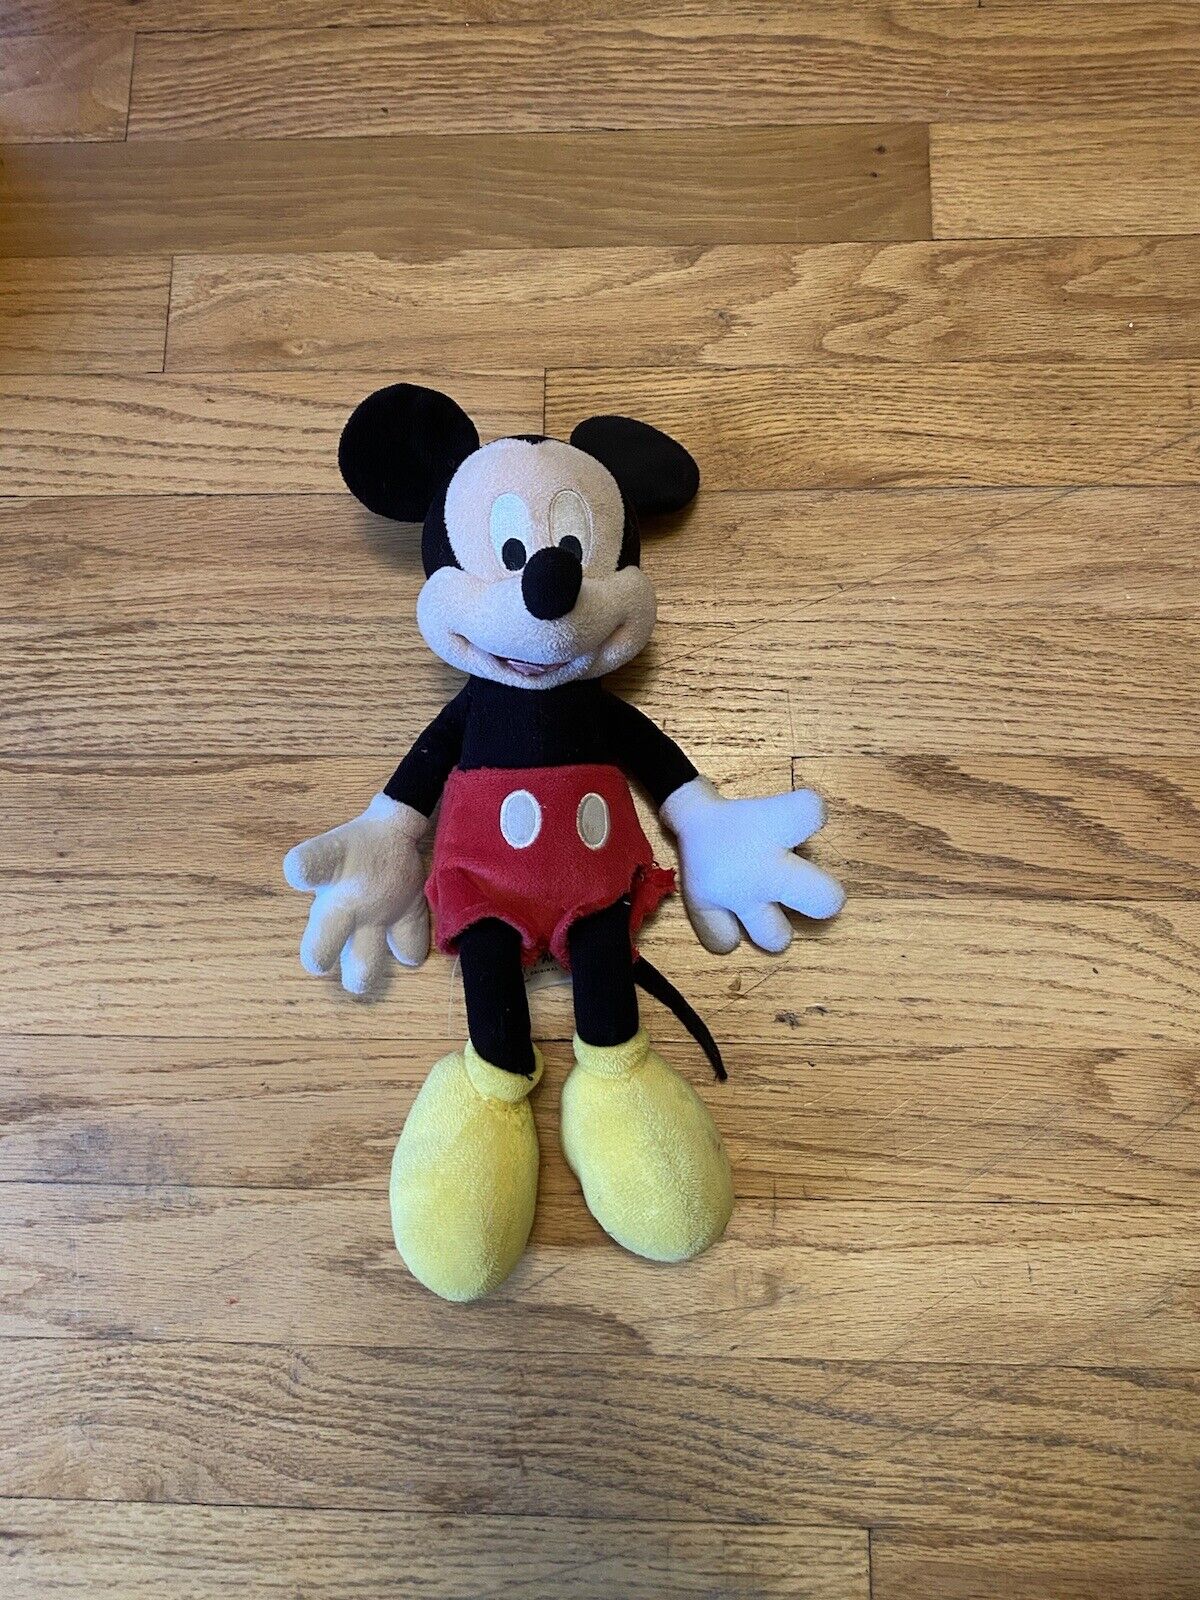 Disney Store Mickey Mouse Plush 13” Genuine Original Authentic Gift Ships Fast